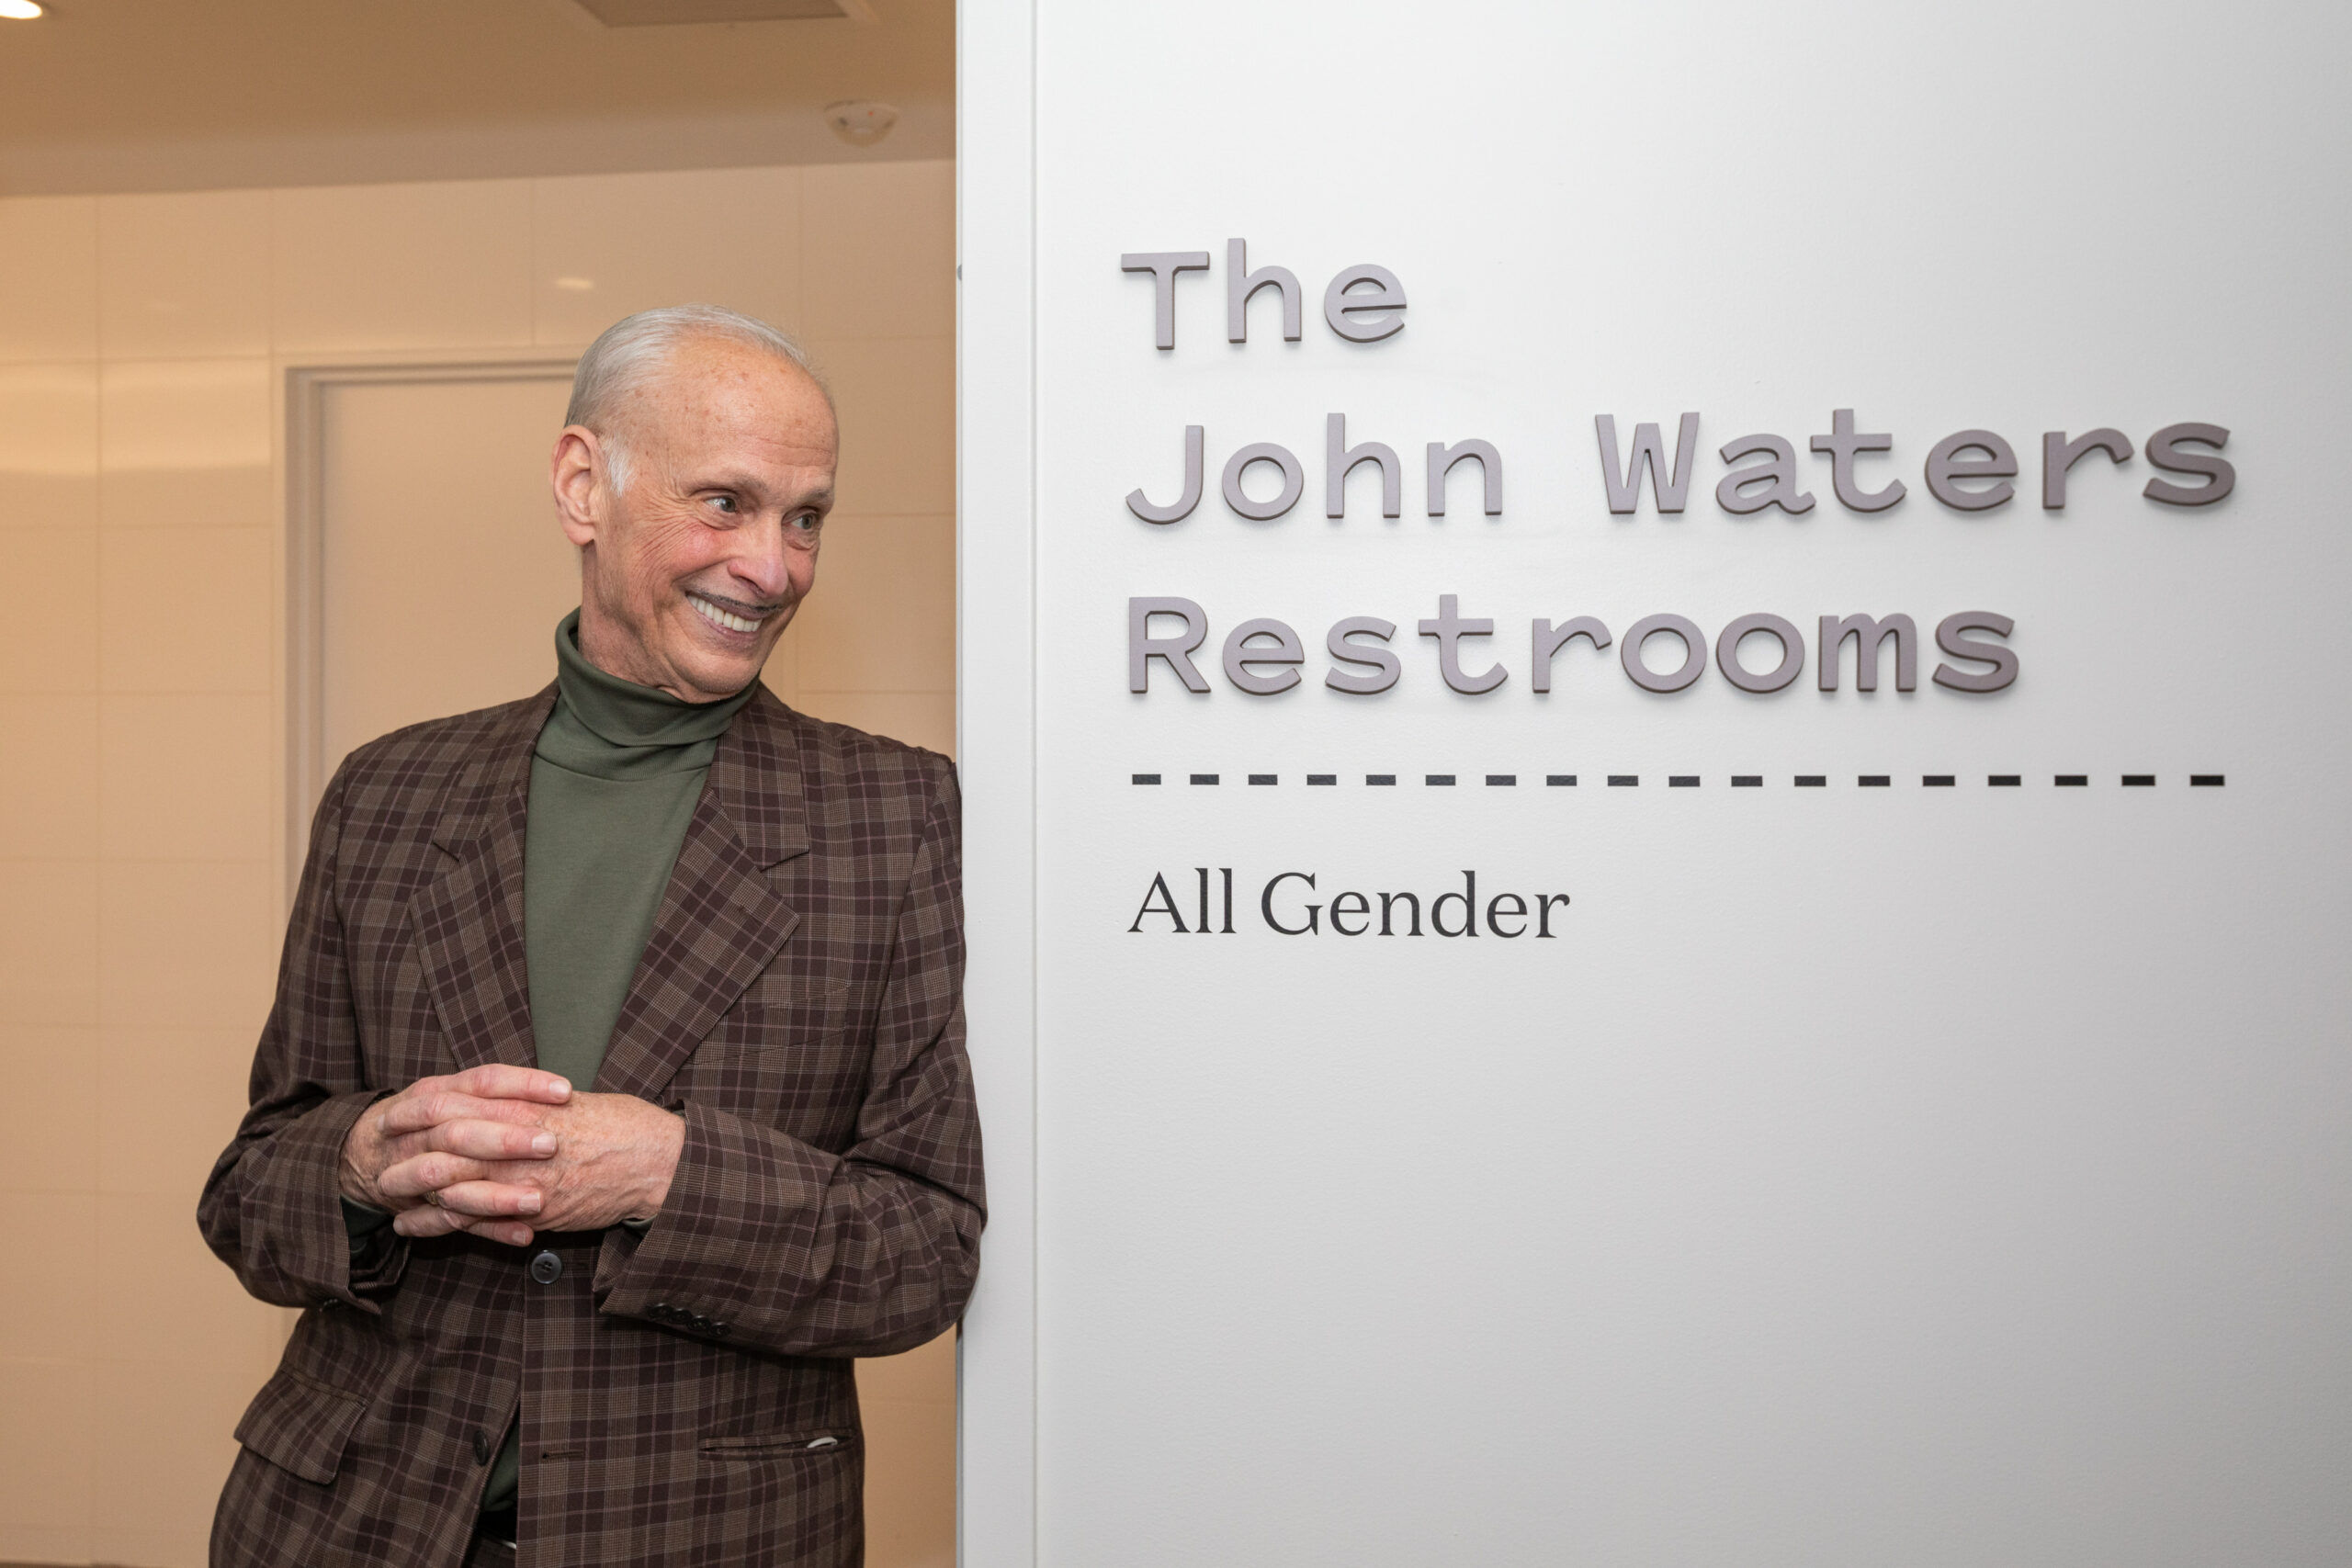 John Waters at the entrance of the Baltimore Museum of Art's "The John Waters Restrooms."